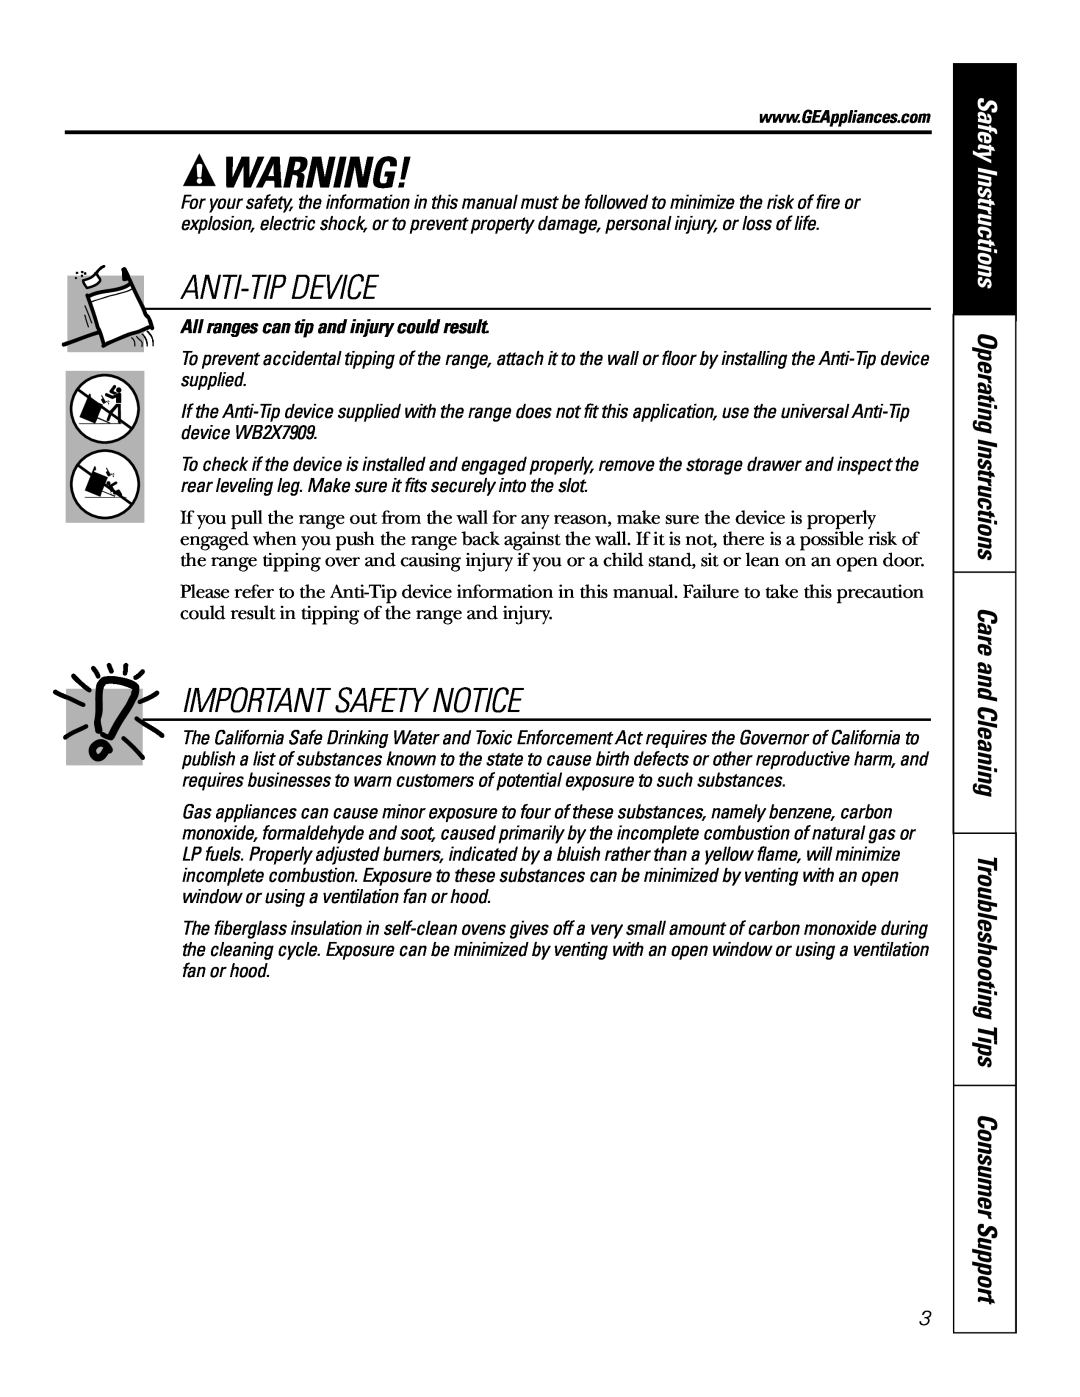 GE JGSP28 owner manual Important Safety Notice, Anti-Tipdevice, All ranges can tip and injury could result 